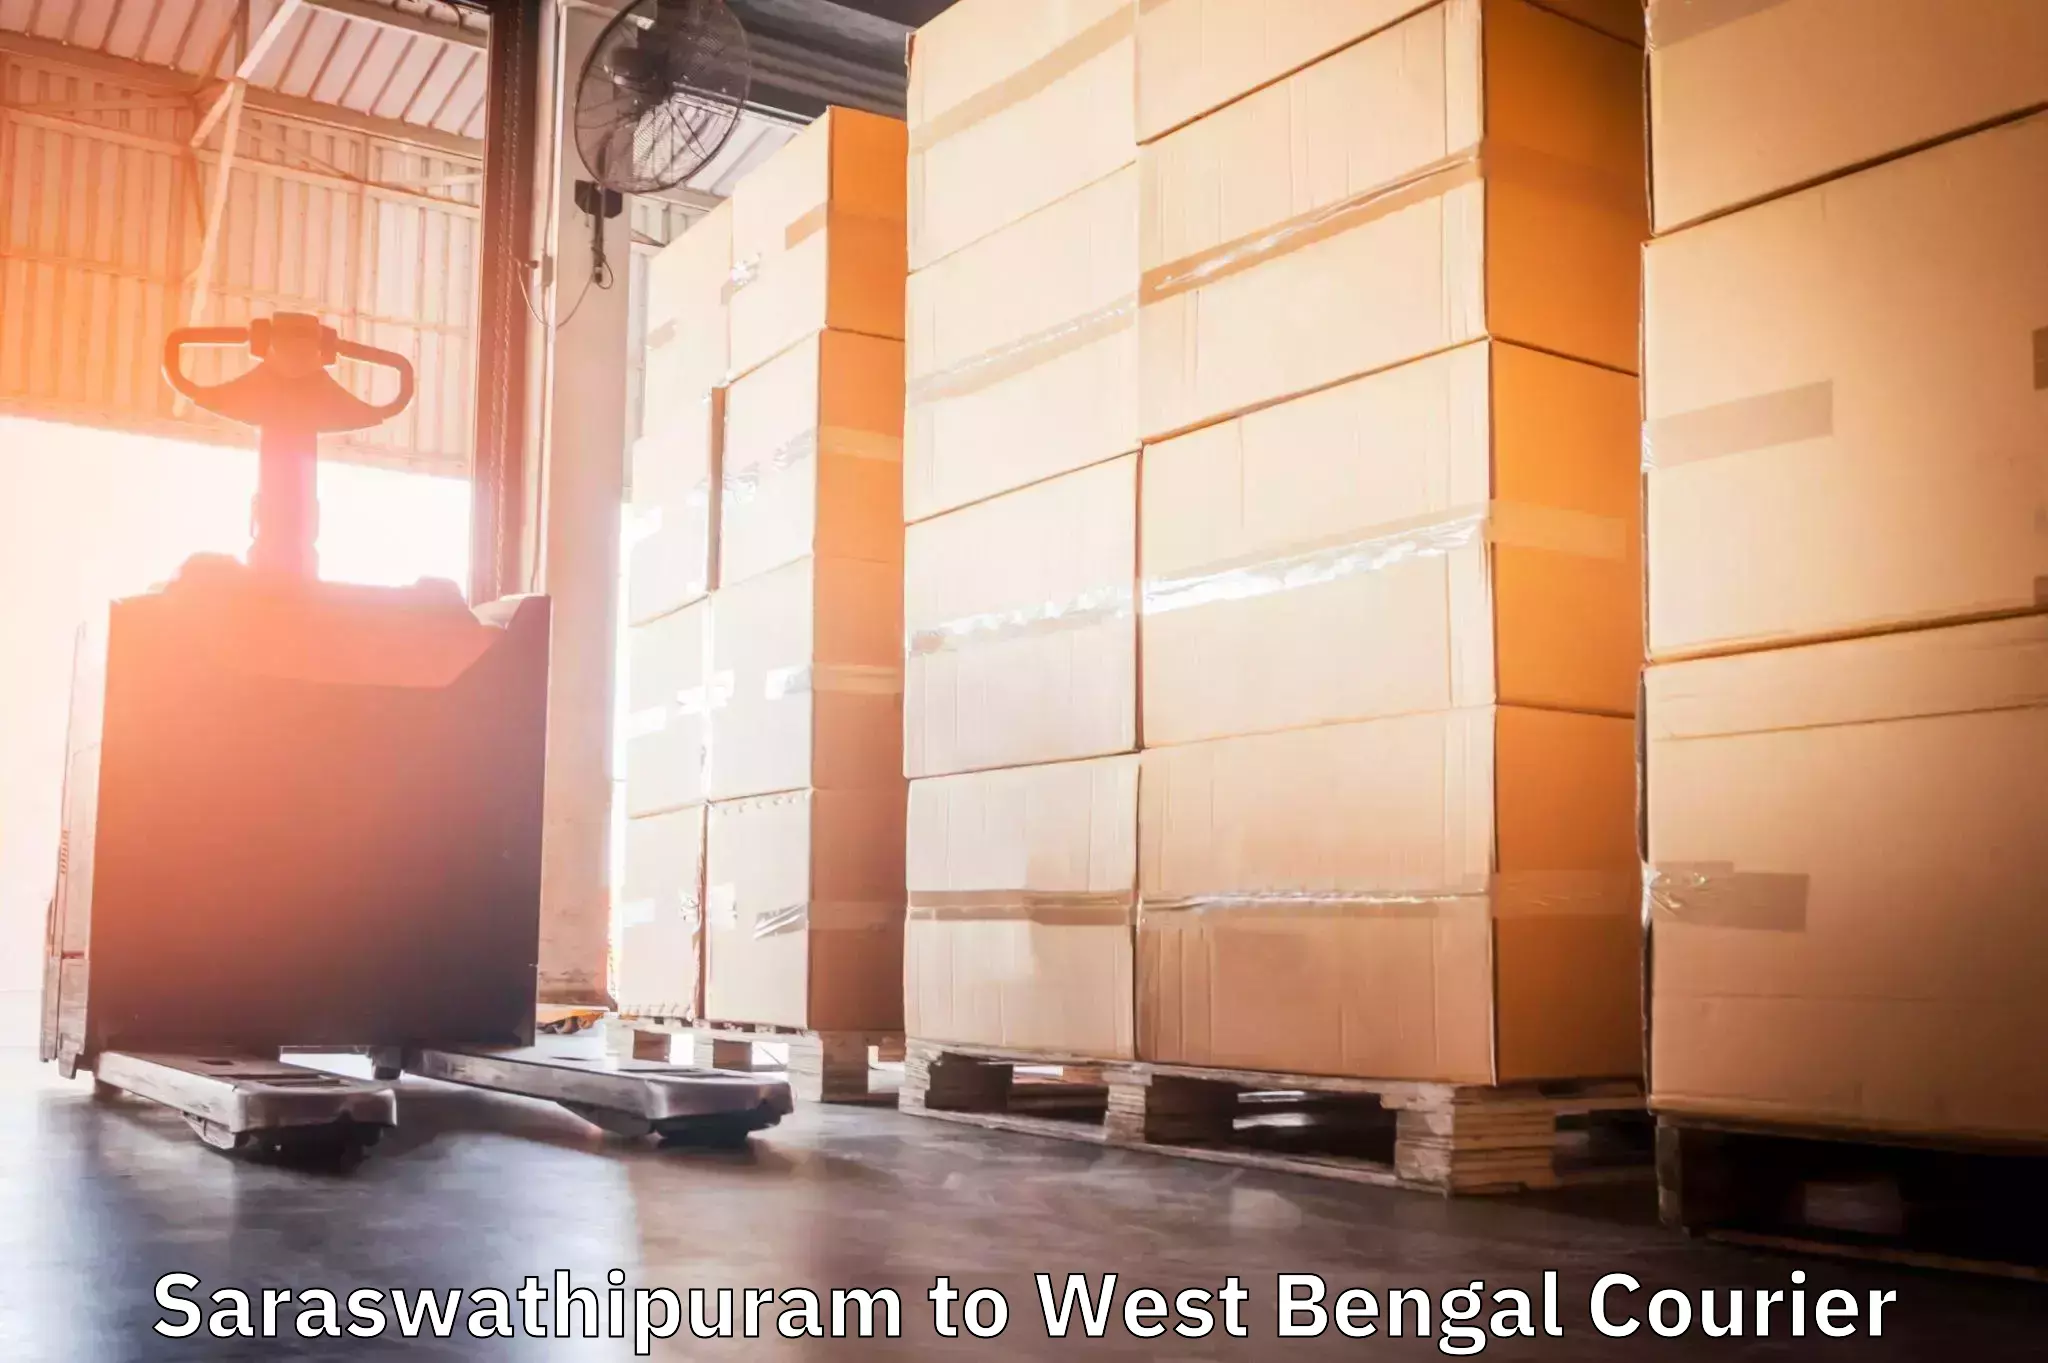 User-friendly delivery service Saraswathipuram to West Bengal